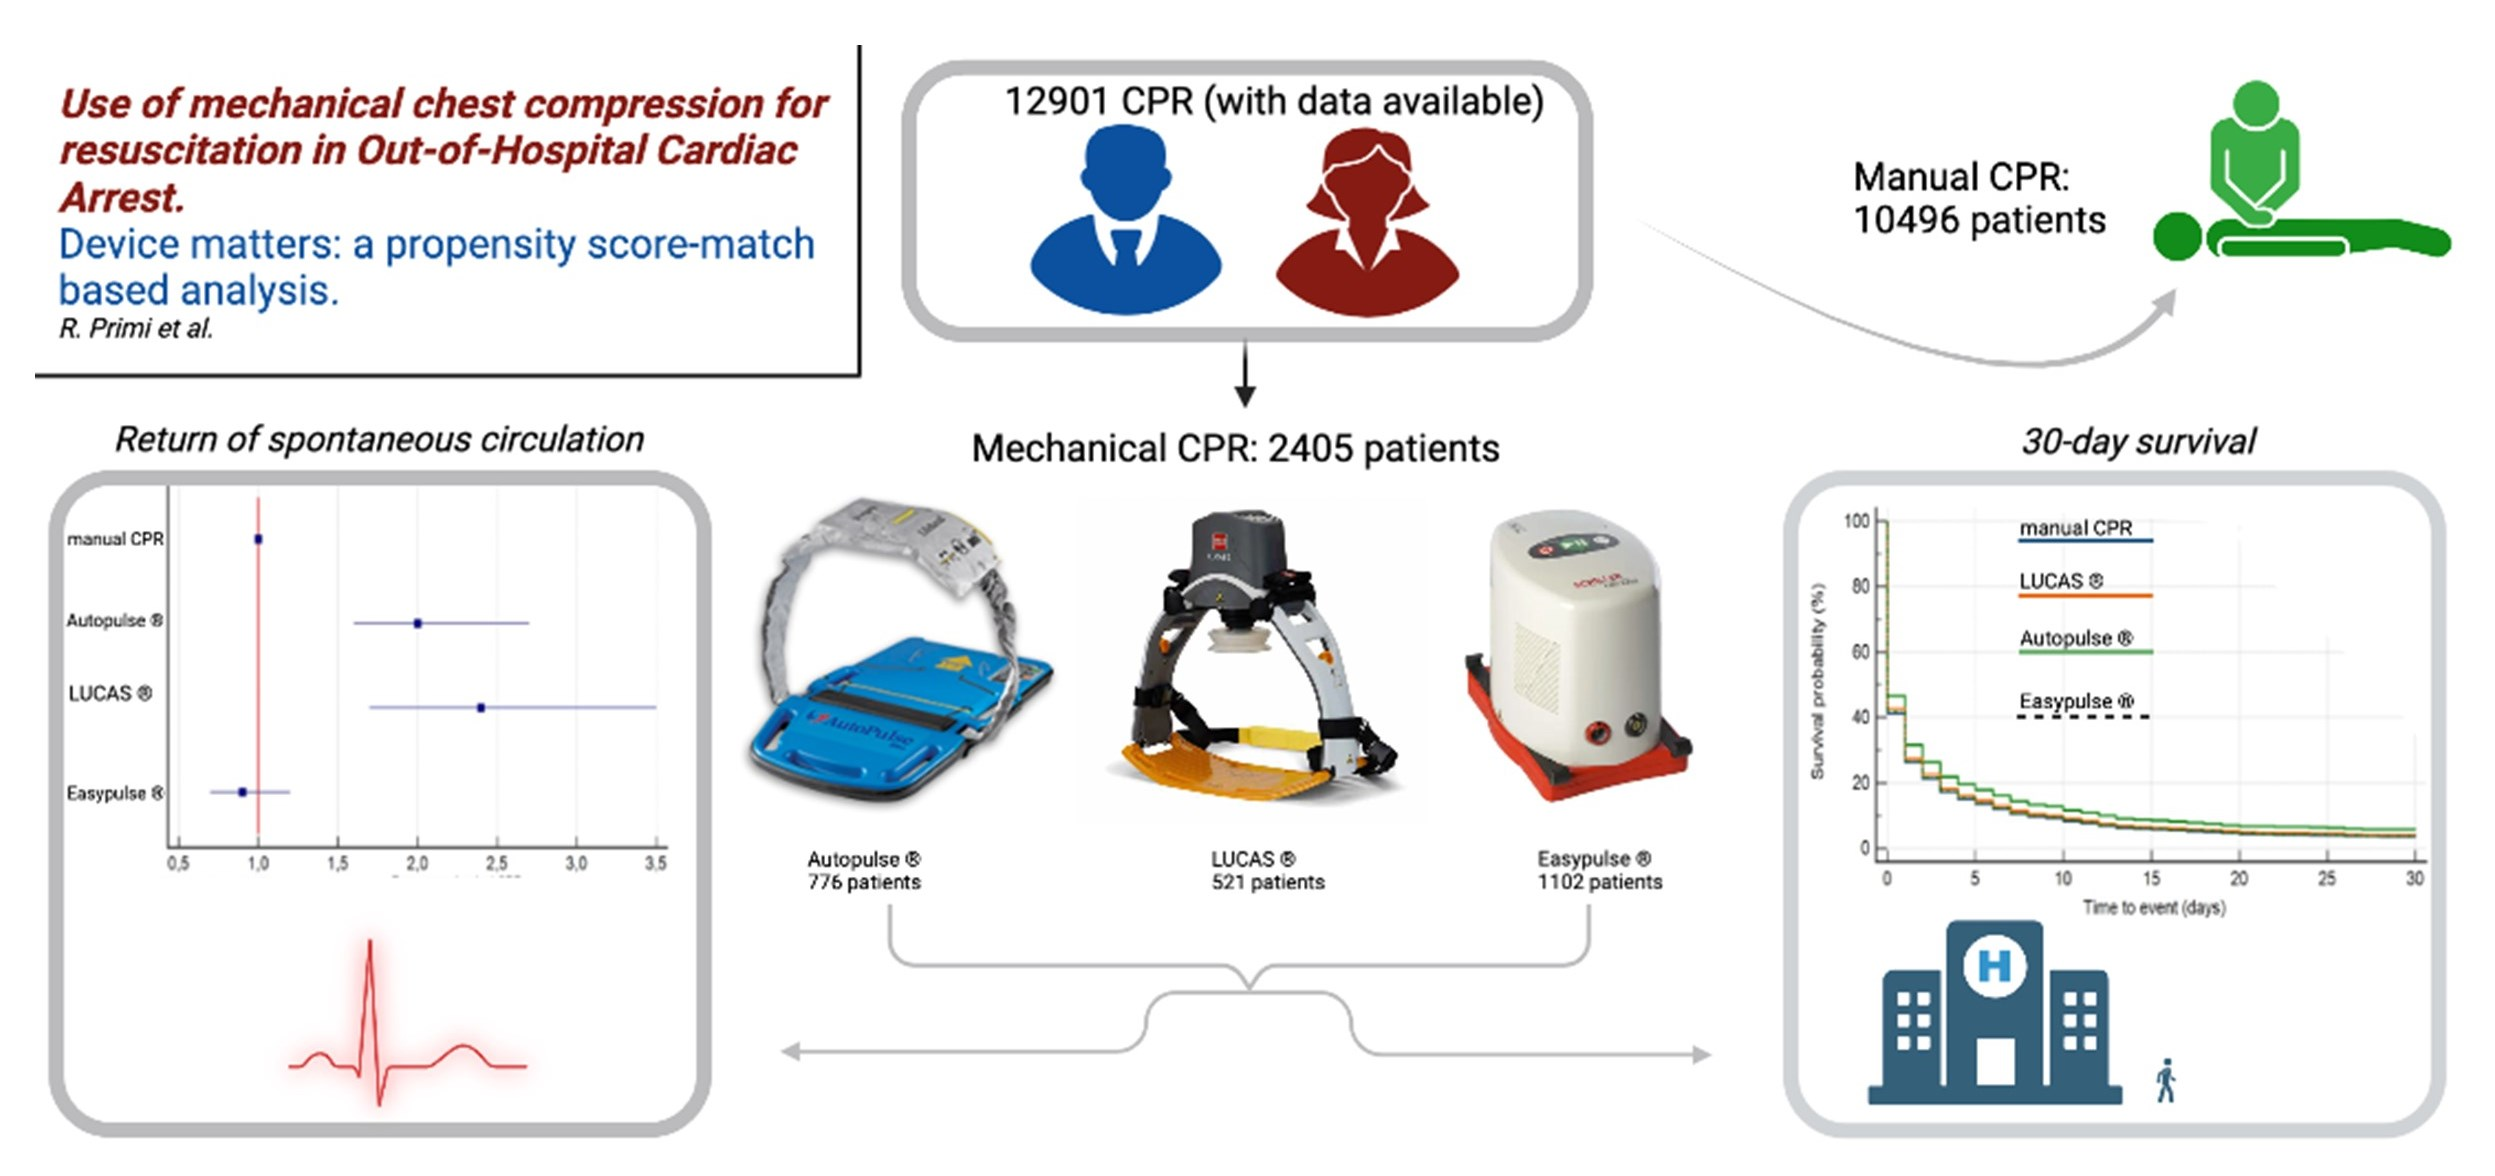 Chest compression methods used in the trial: (A) Standard position